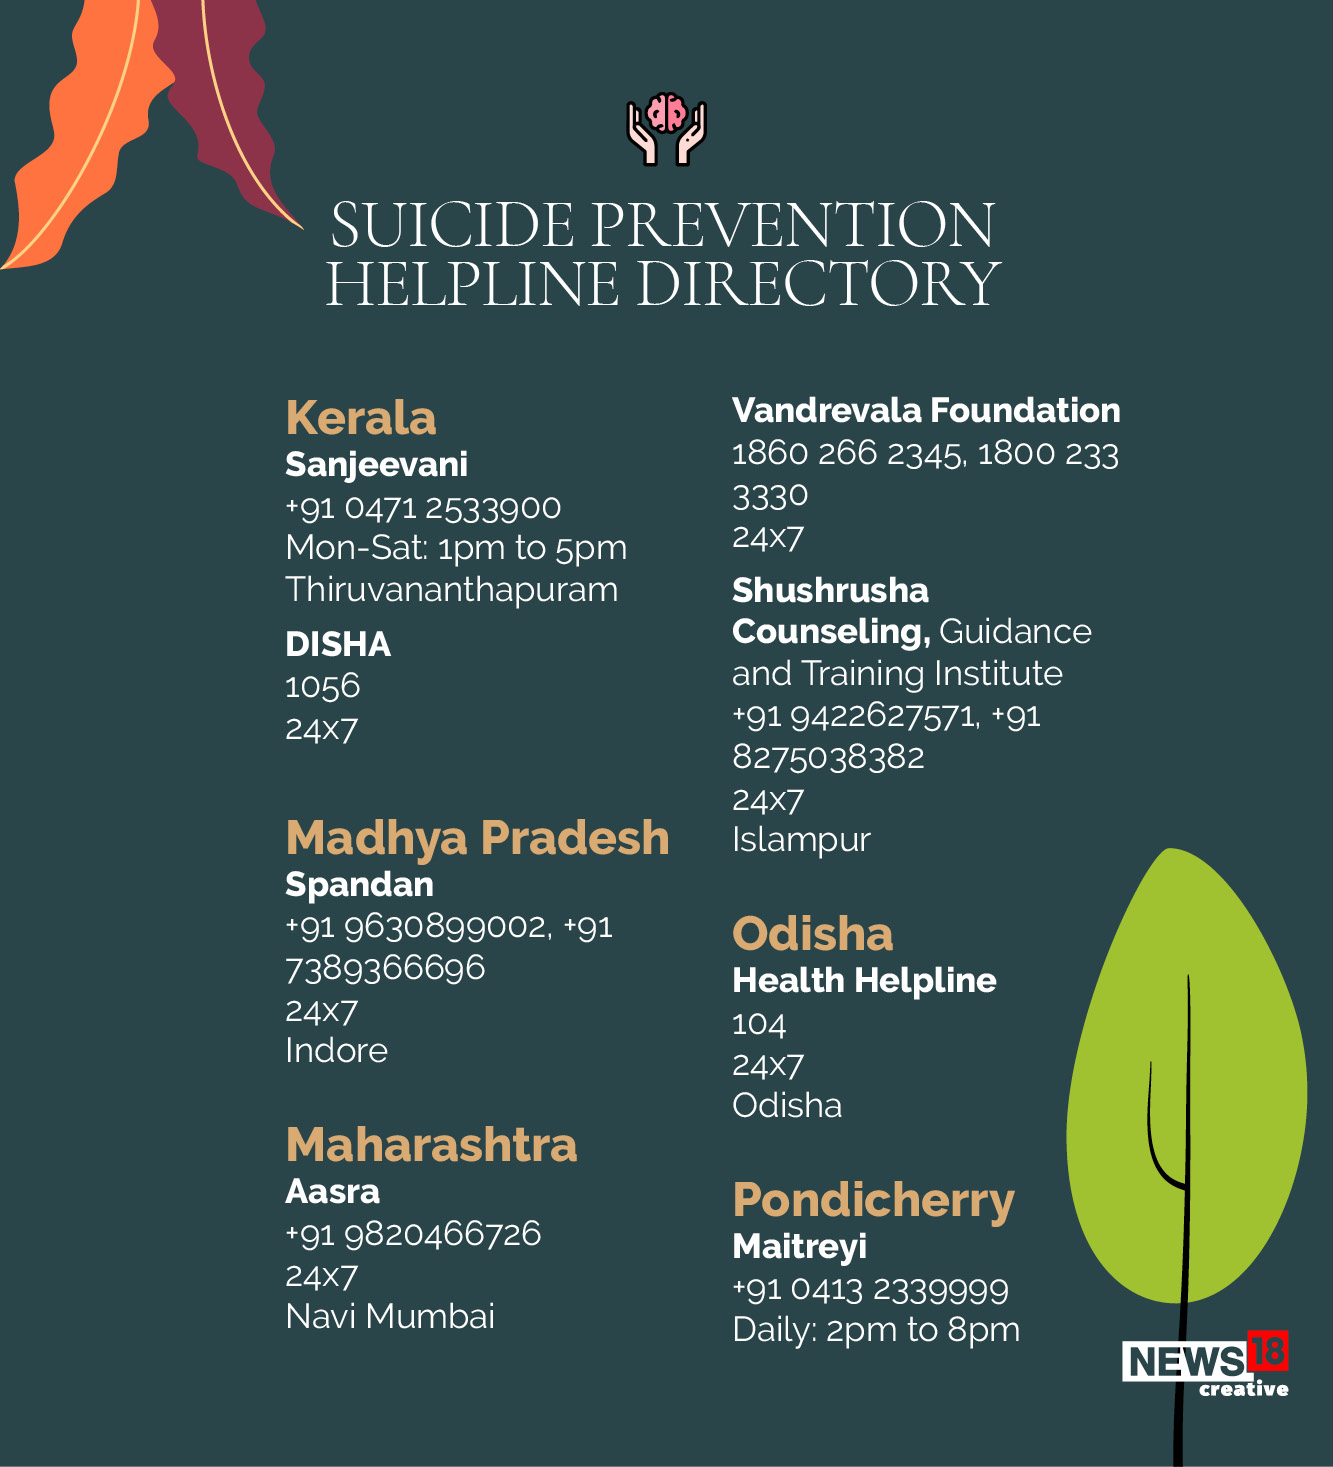 Suicide prevention: When to seek help and who to call